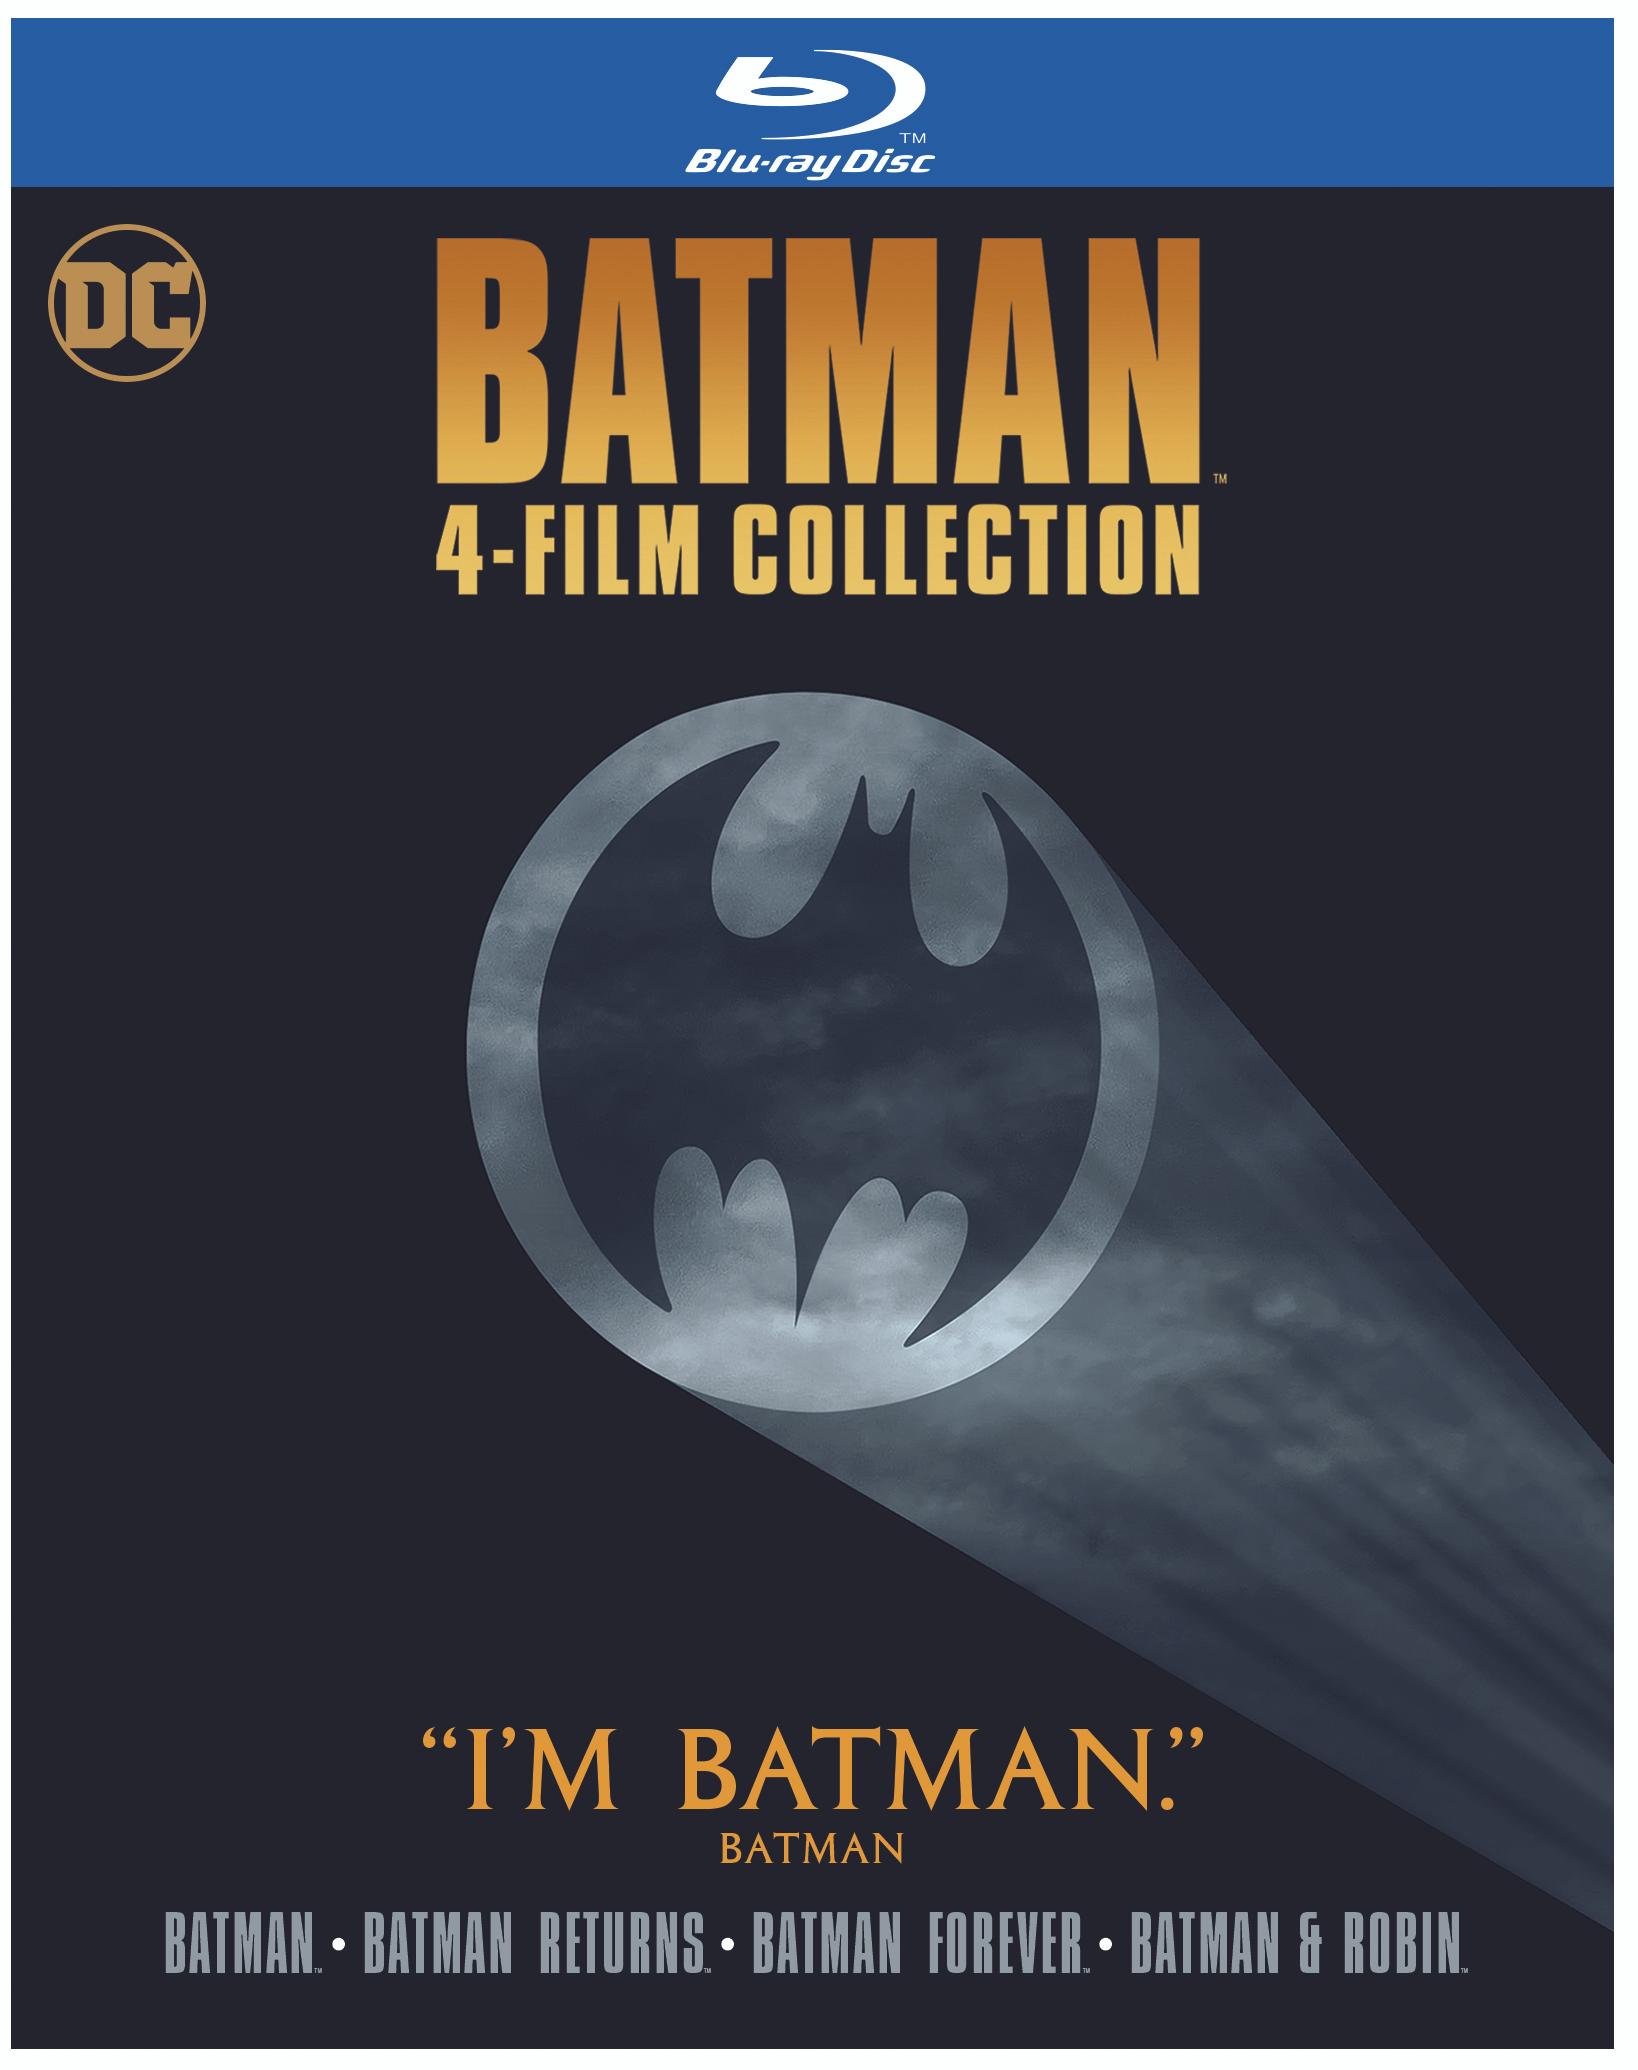 Batman 4-Film Collection (Iconic Moments LL) (Blu-ray Set) - Blu-ray [ 1997 ]  - Adventure Movies On Blu-ray - Movies On GRUV